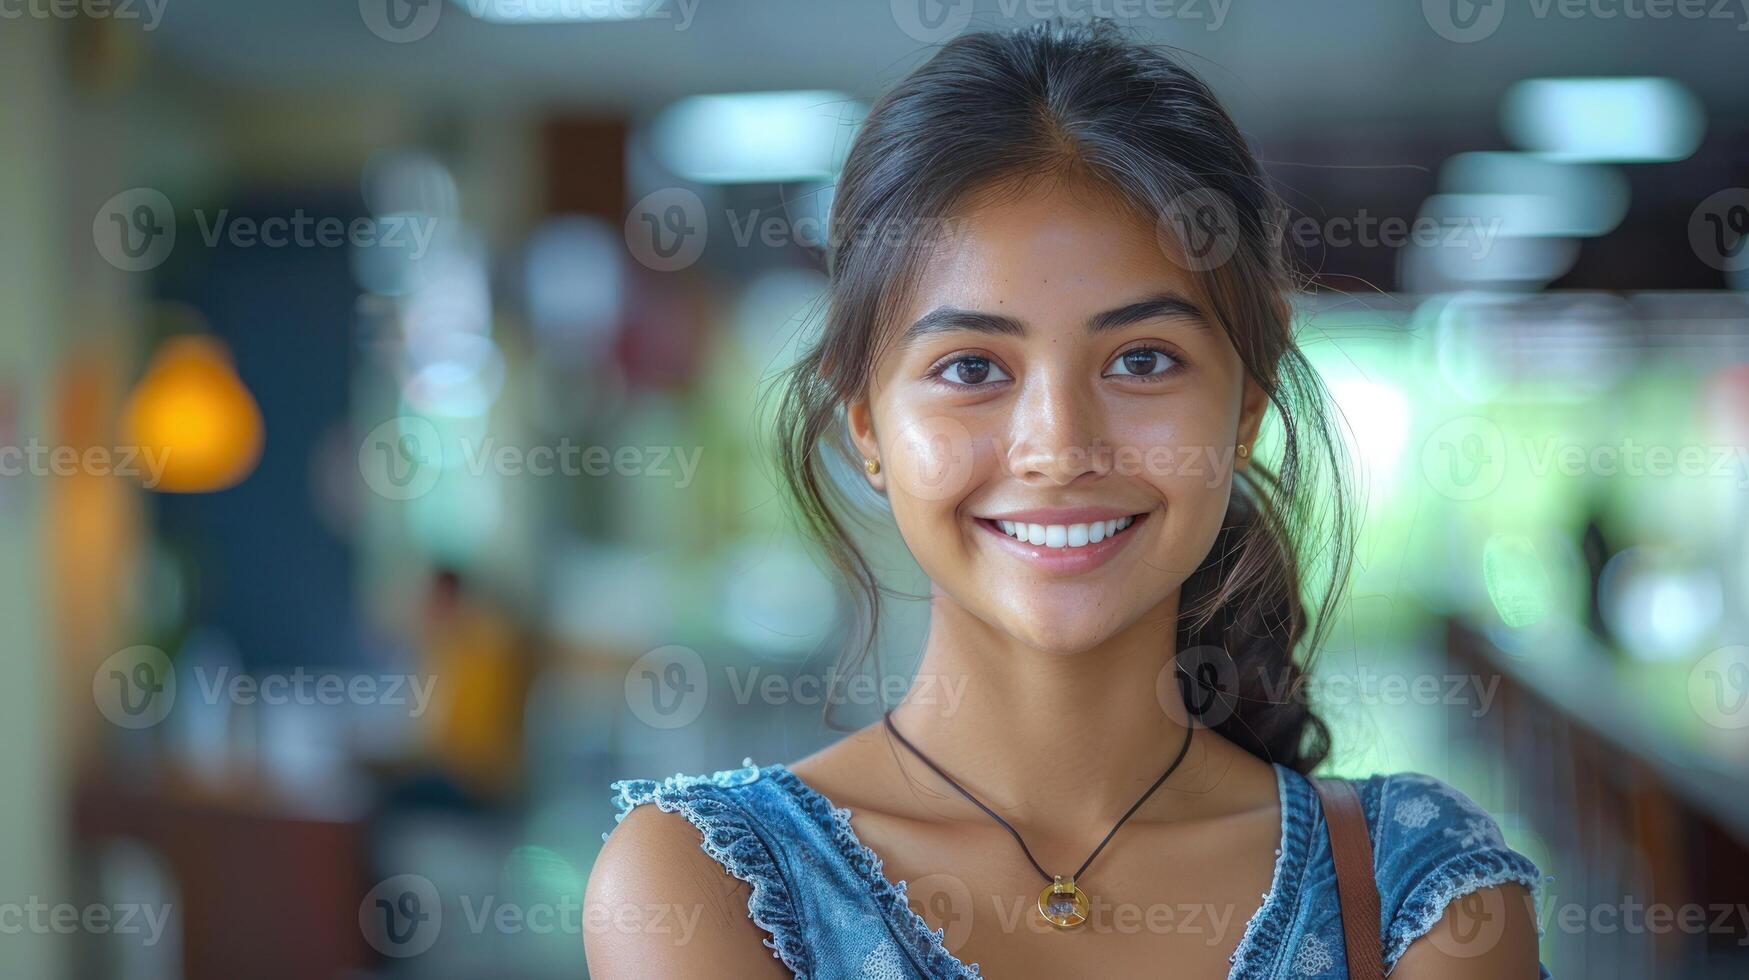 A young woman smiles while wearing a blue dress photo